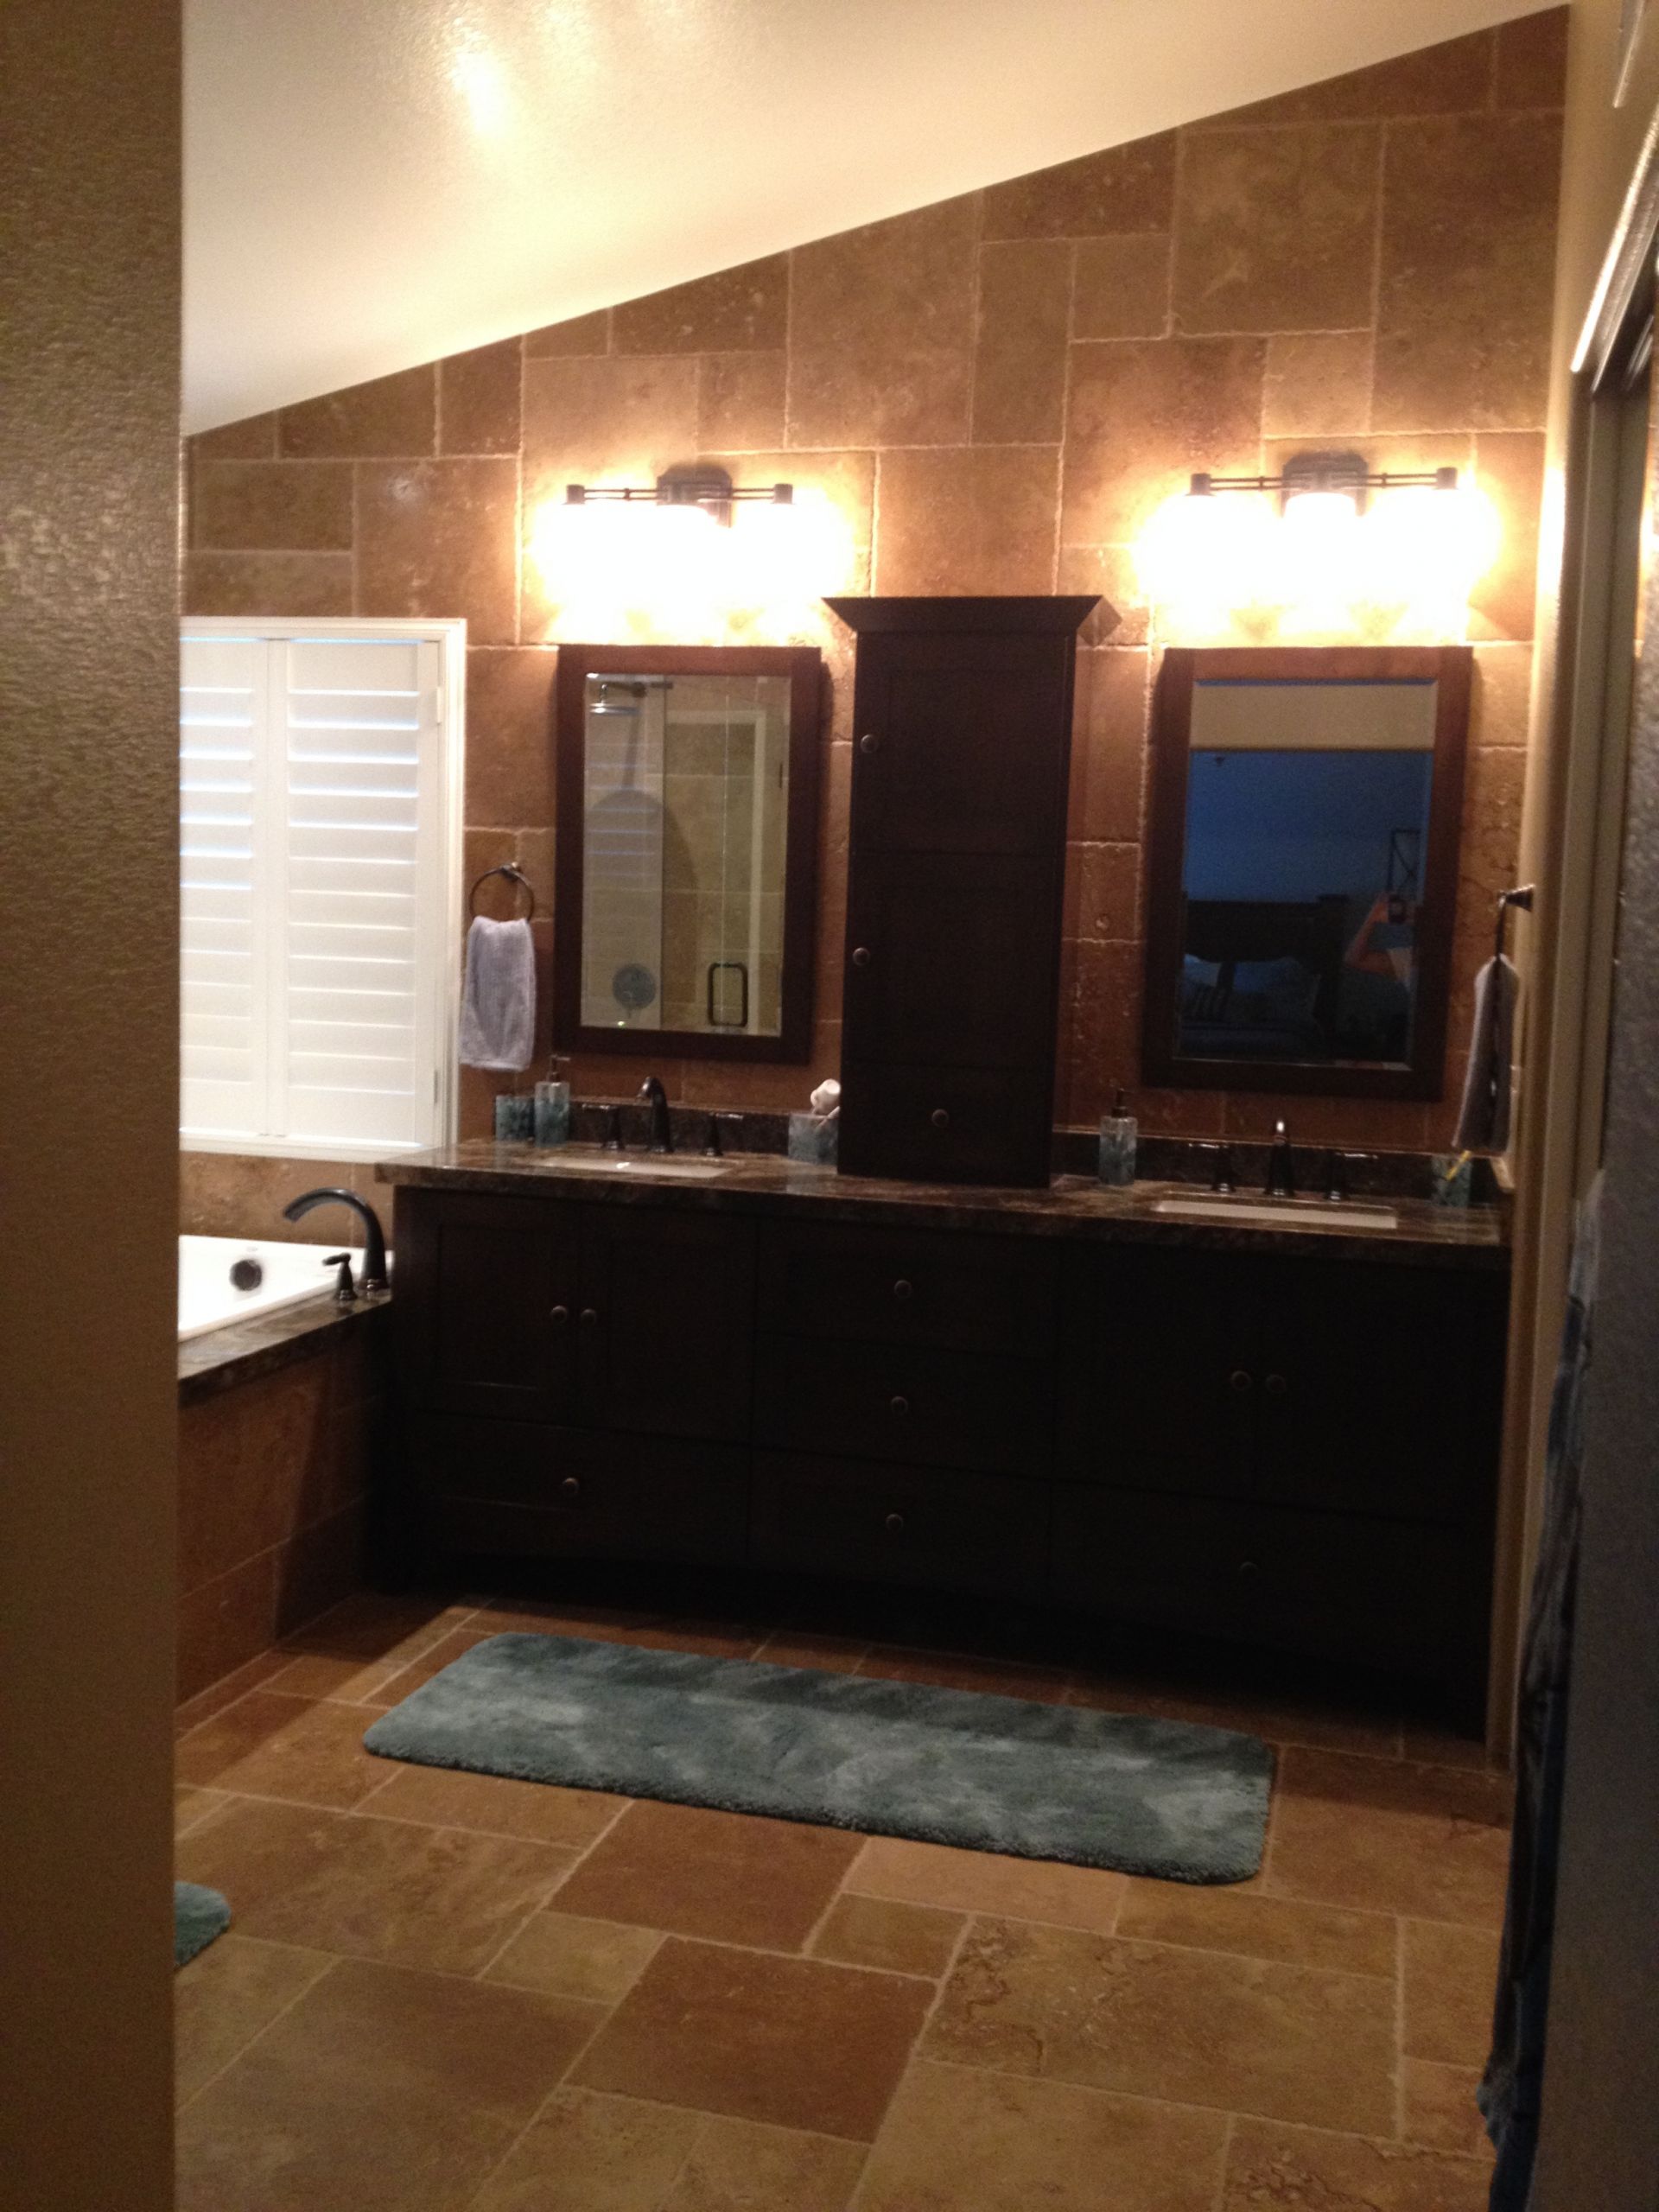 Photos Of Bathroom Remodels
 of Our $23 922 Bathroom Remodel and Some Lessons